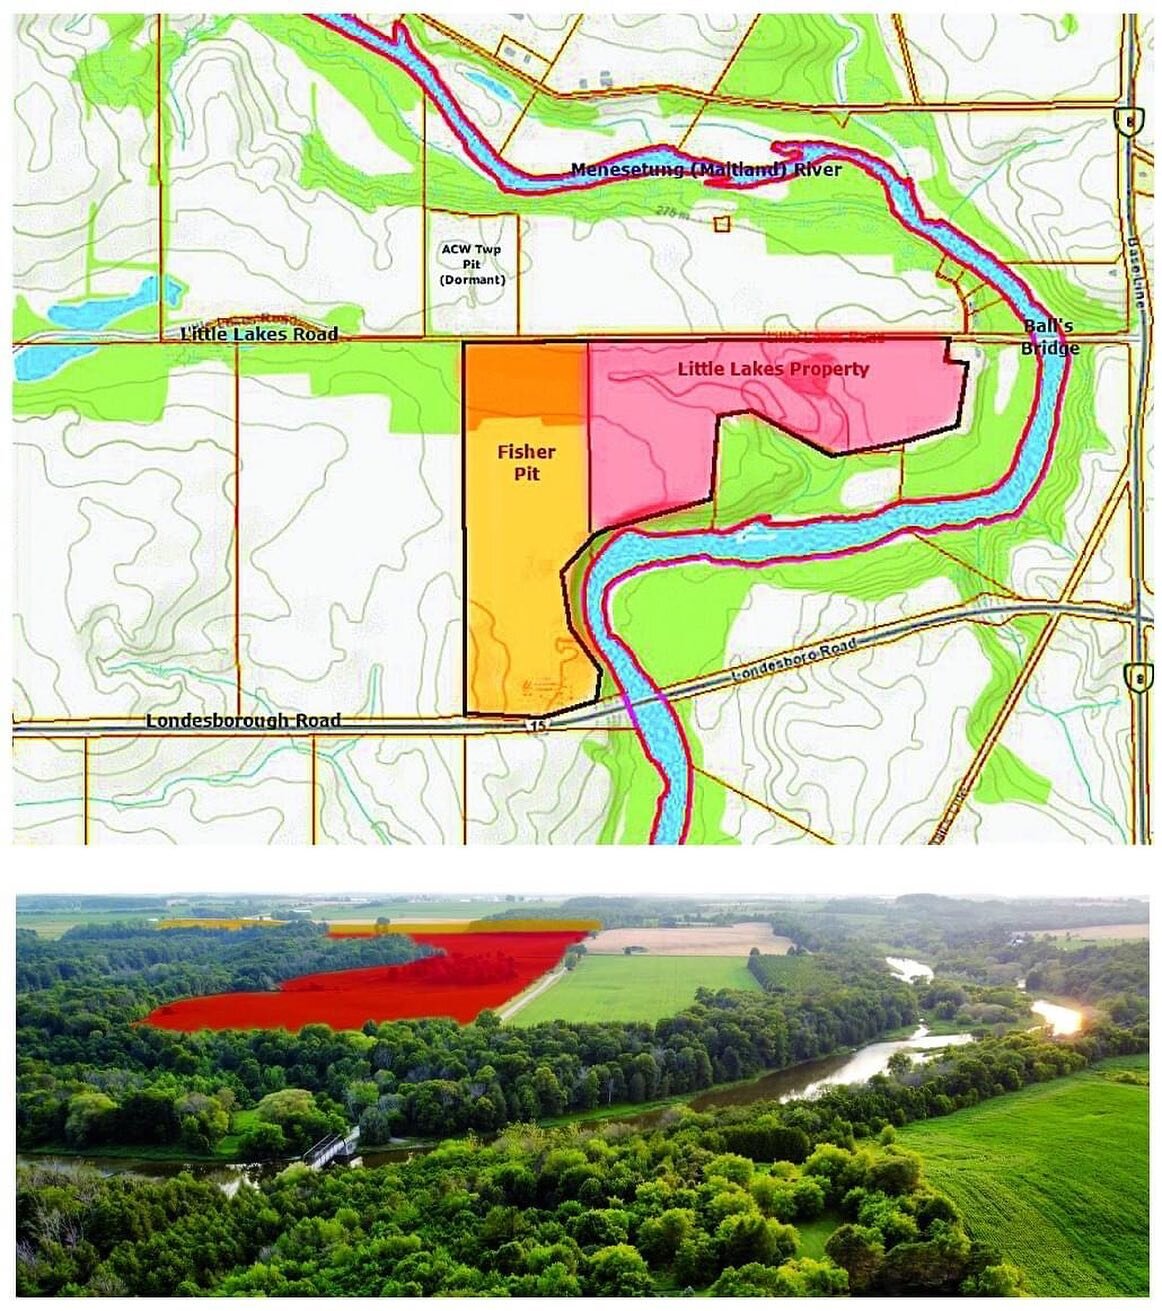 To give you a different perspective on the scale of this pit the aerial photo below is colour coded the same as the map.  You can see Historic Ball's Bridge in the front. #huroncounty #goderich #stopthepit #acw #environment #menesetungriver #clinton 